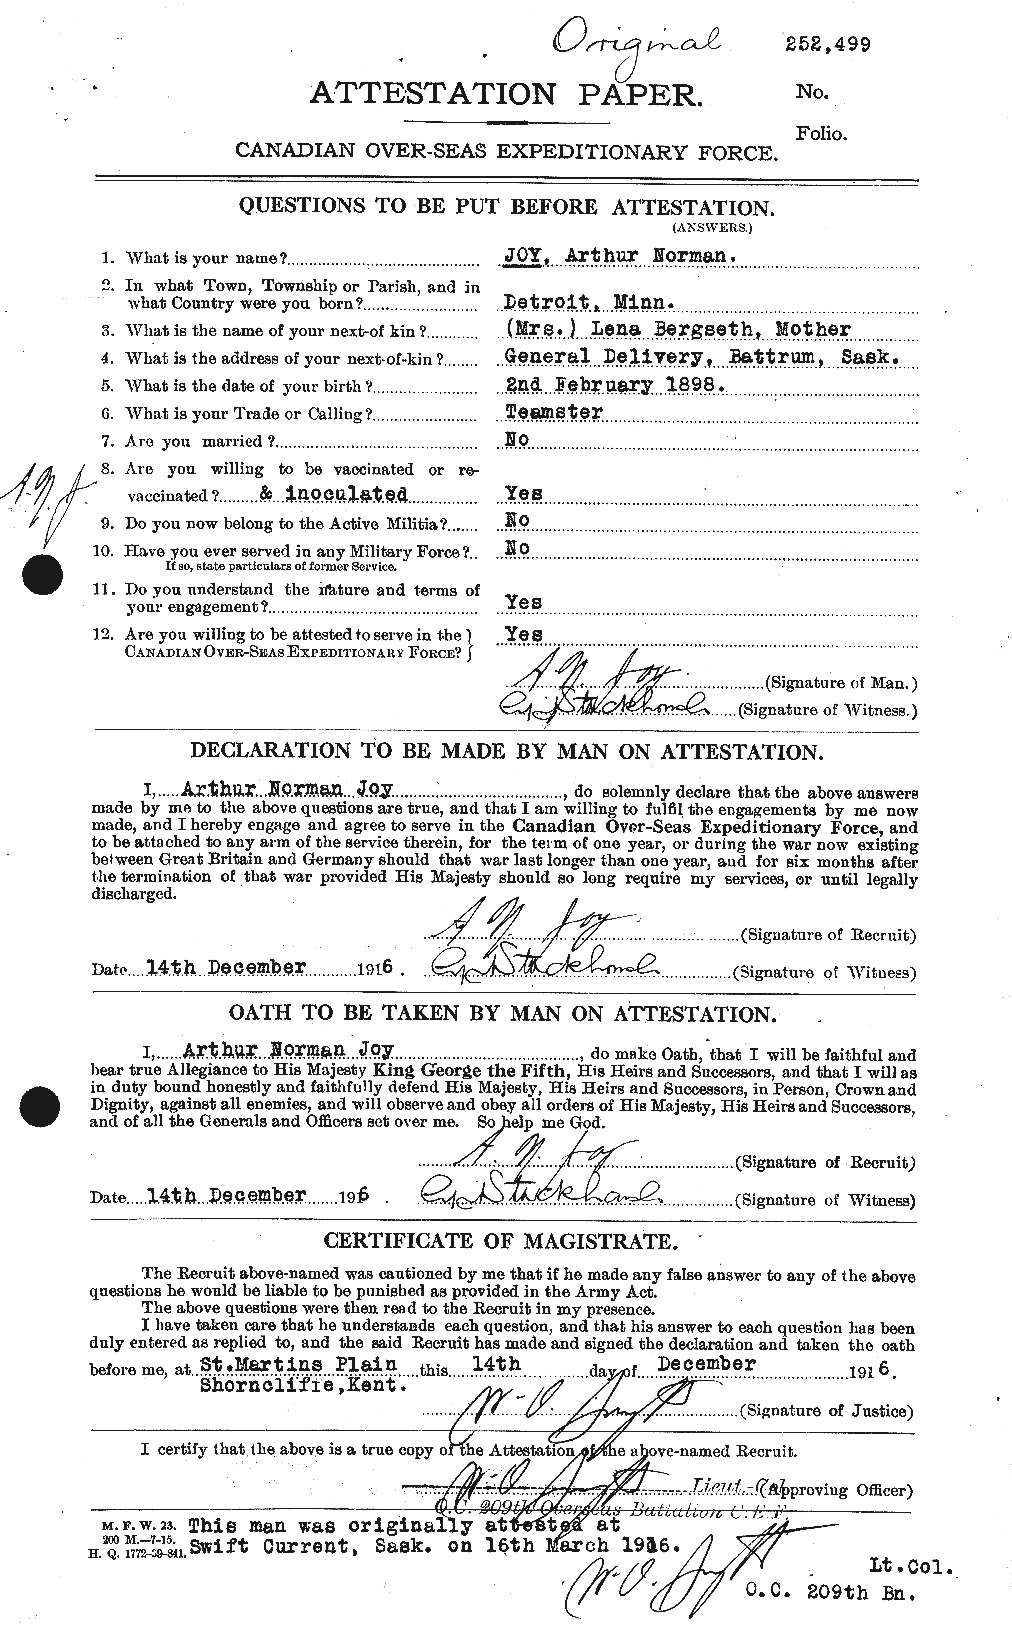 Personnel Records of the First World War - CEF 426355a